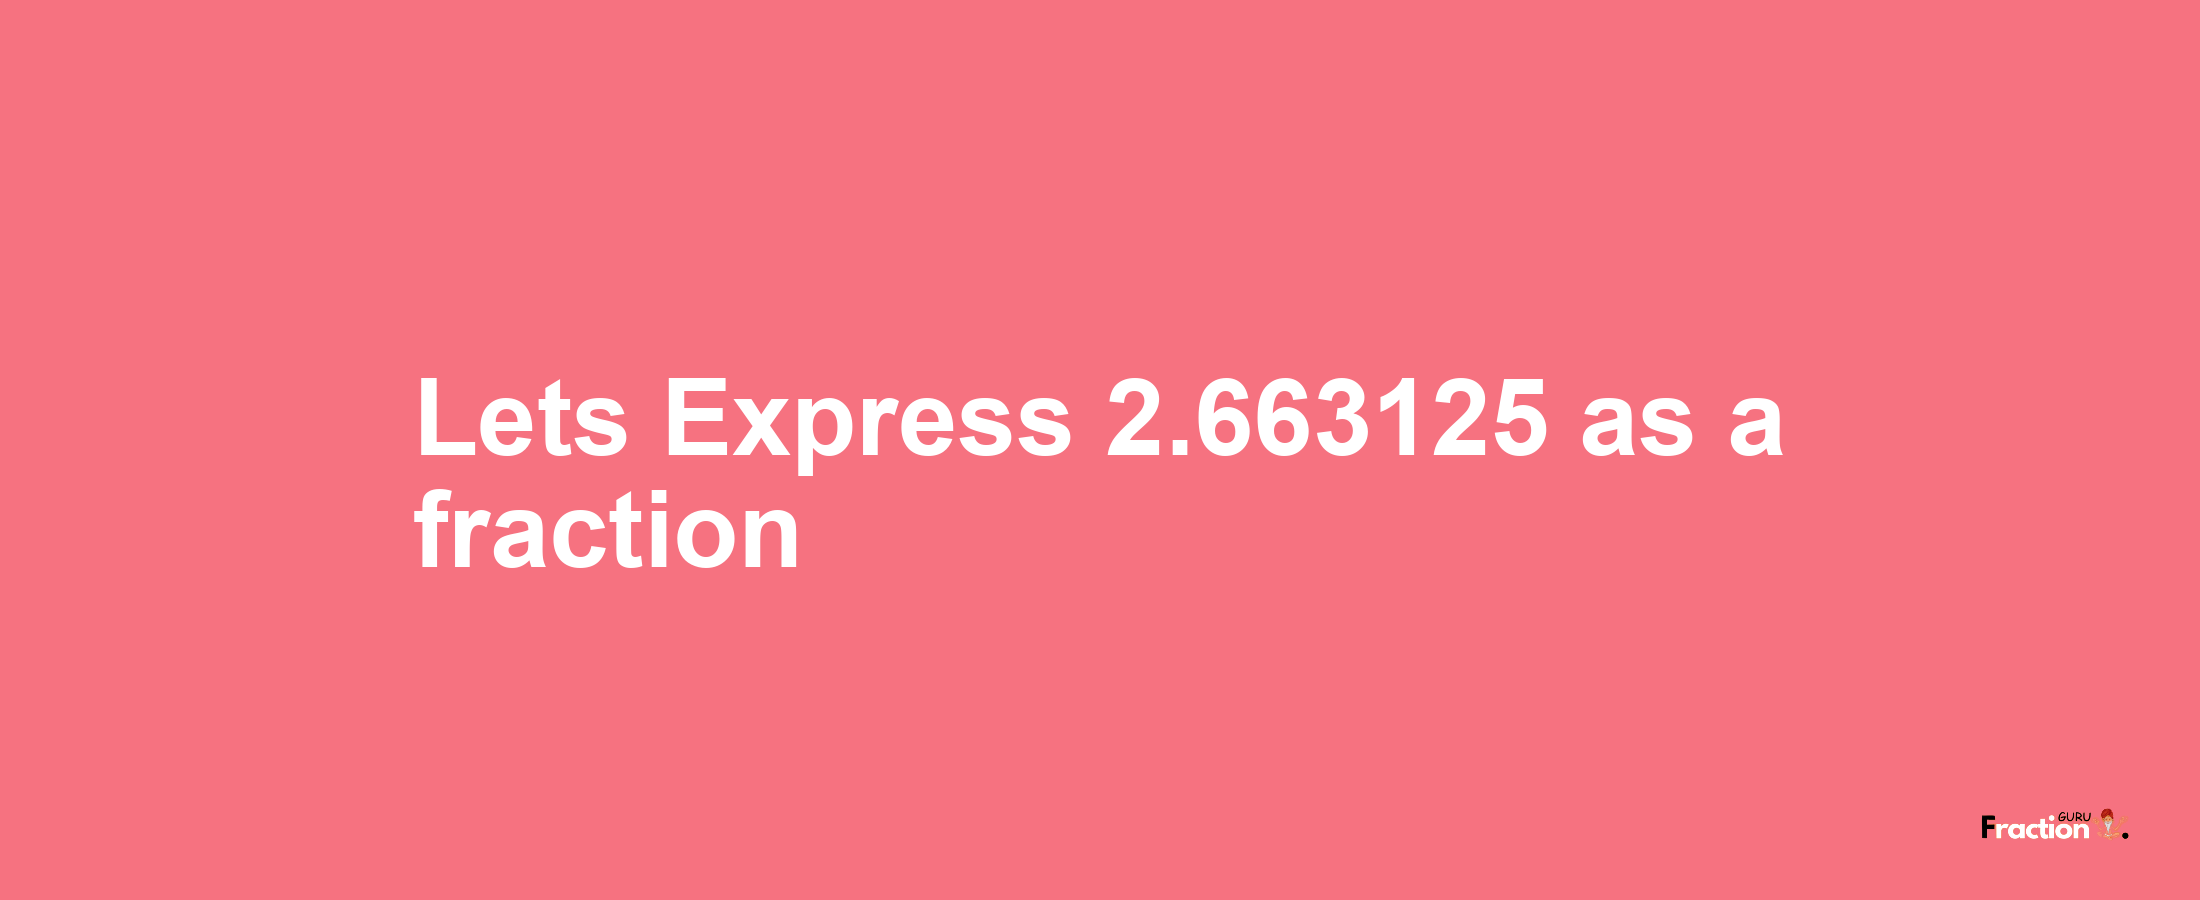 Lets Express 2.663125 as afraction